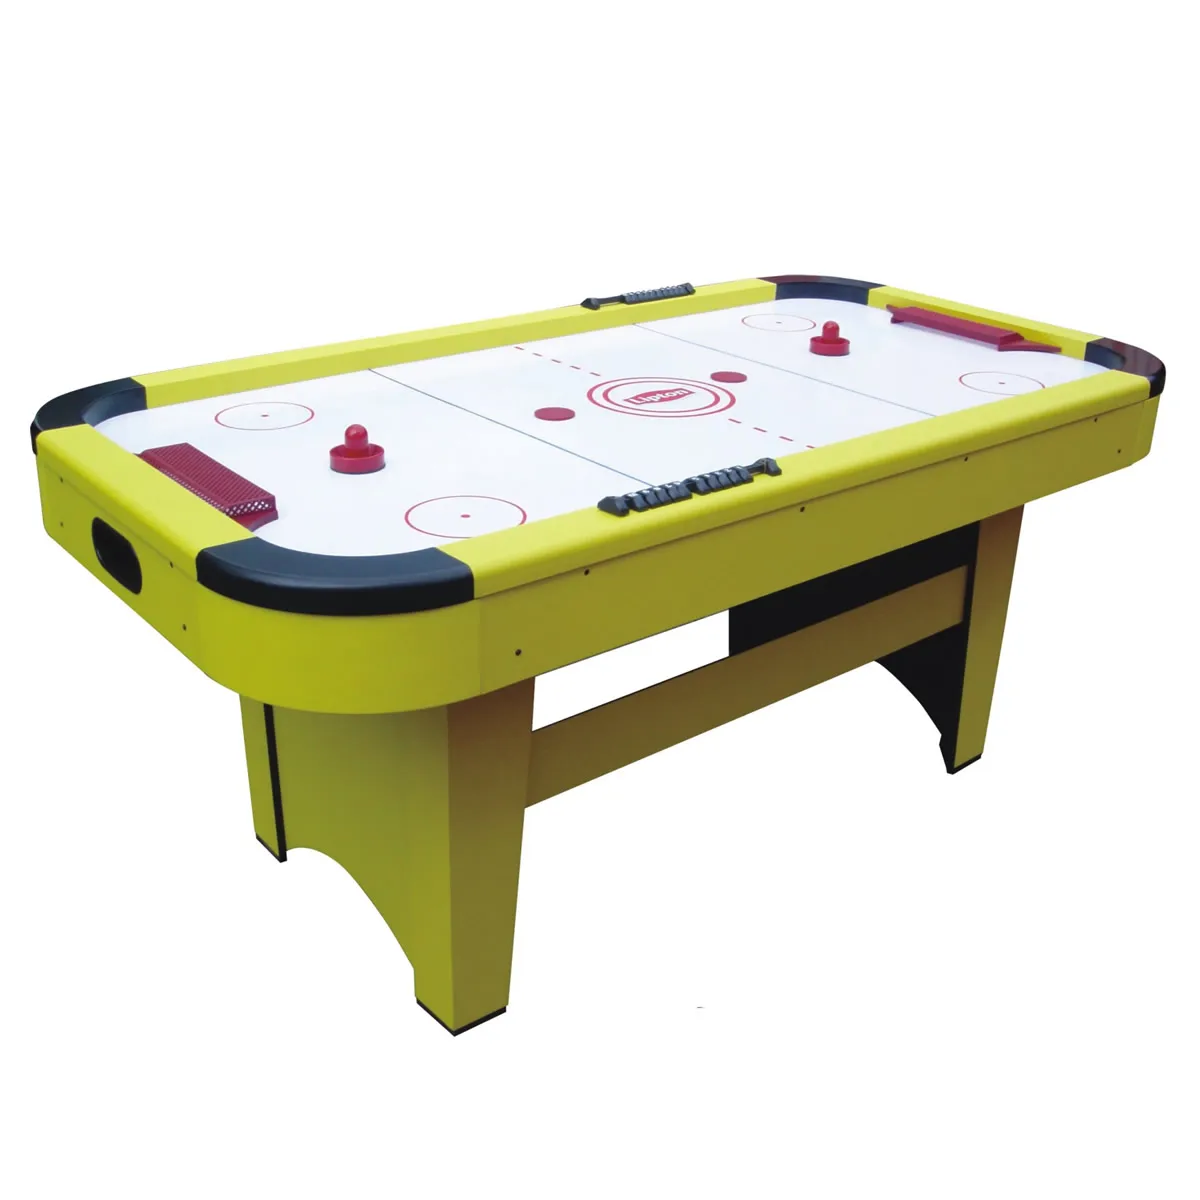 Classic Sport Air Hockey Table At Competitive Price Buy Cheap